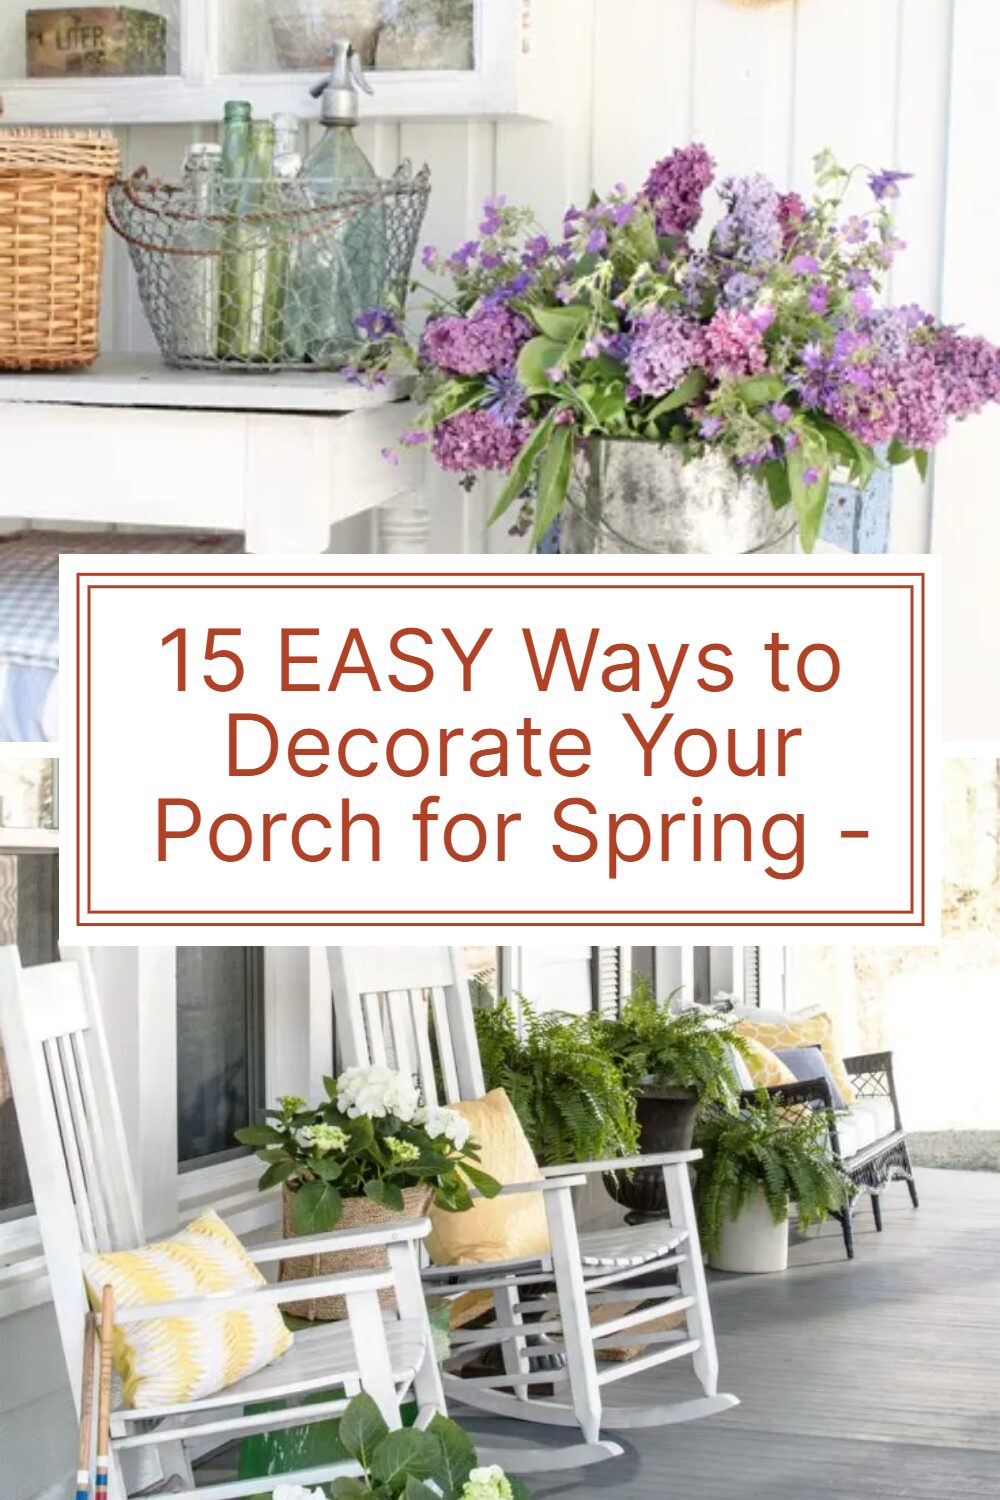 15 EASY Ways to Decorate Your Porch for Spring